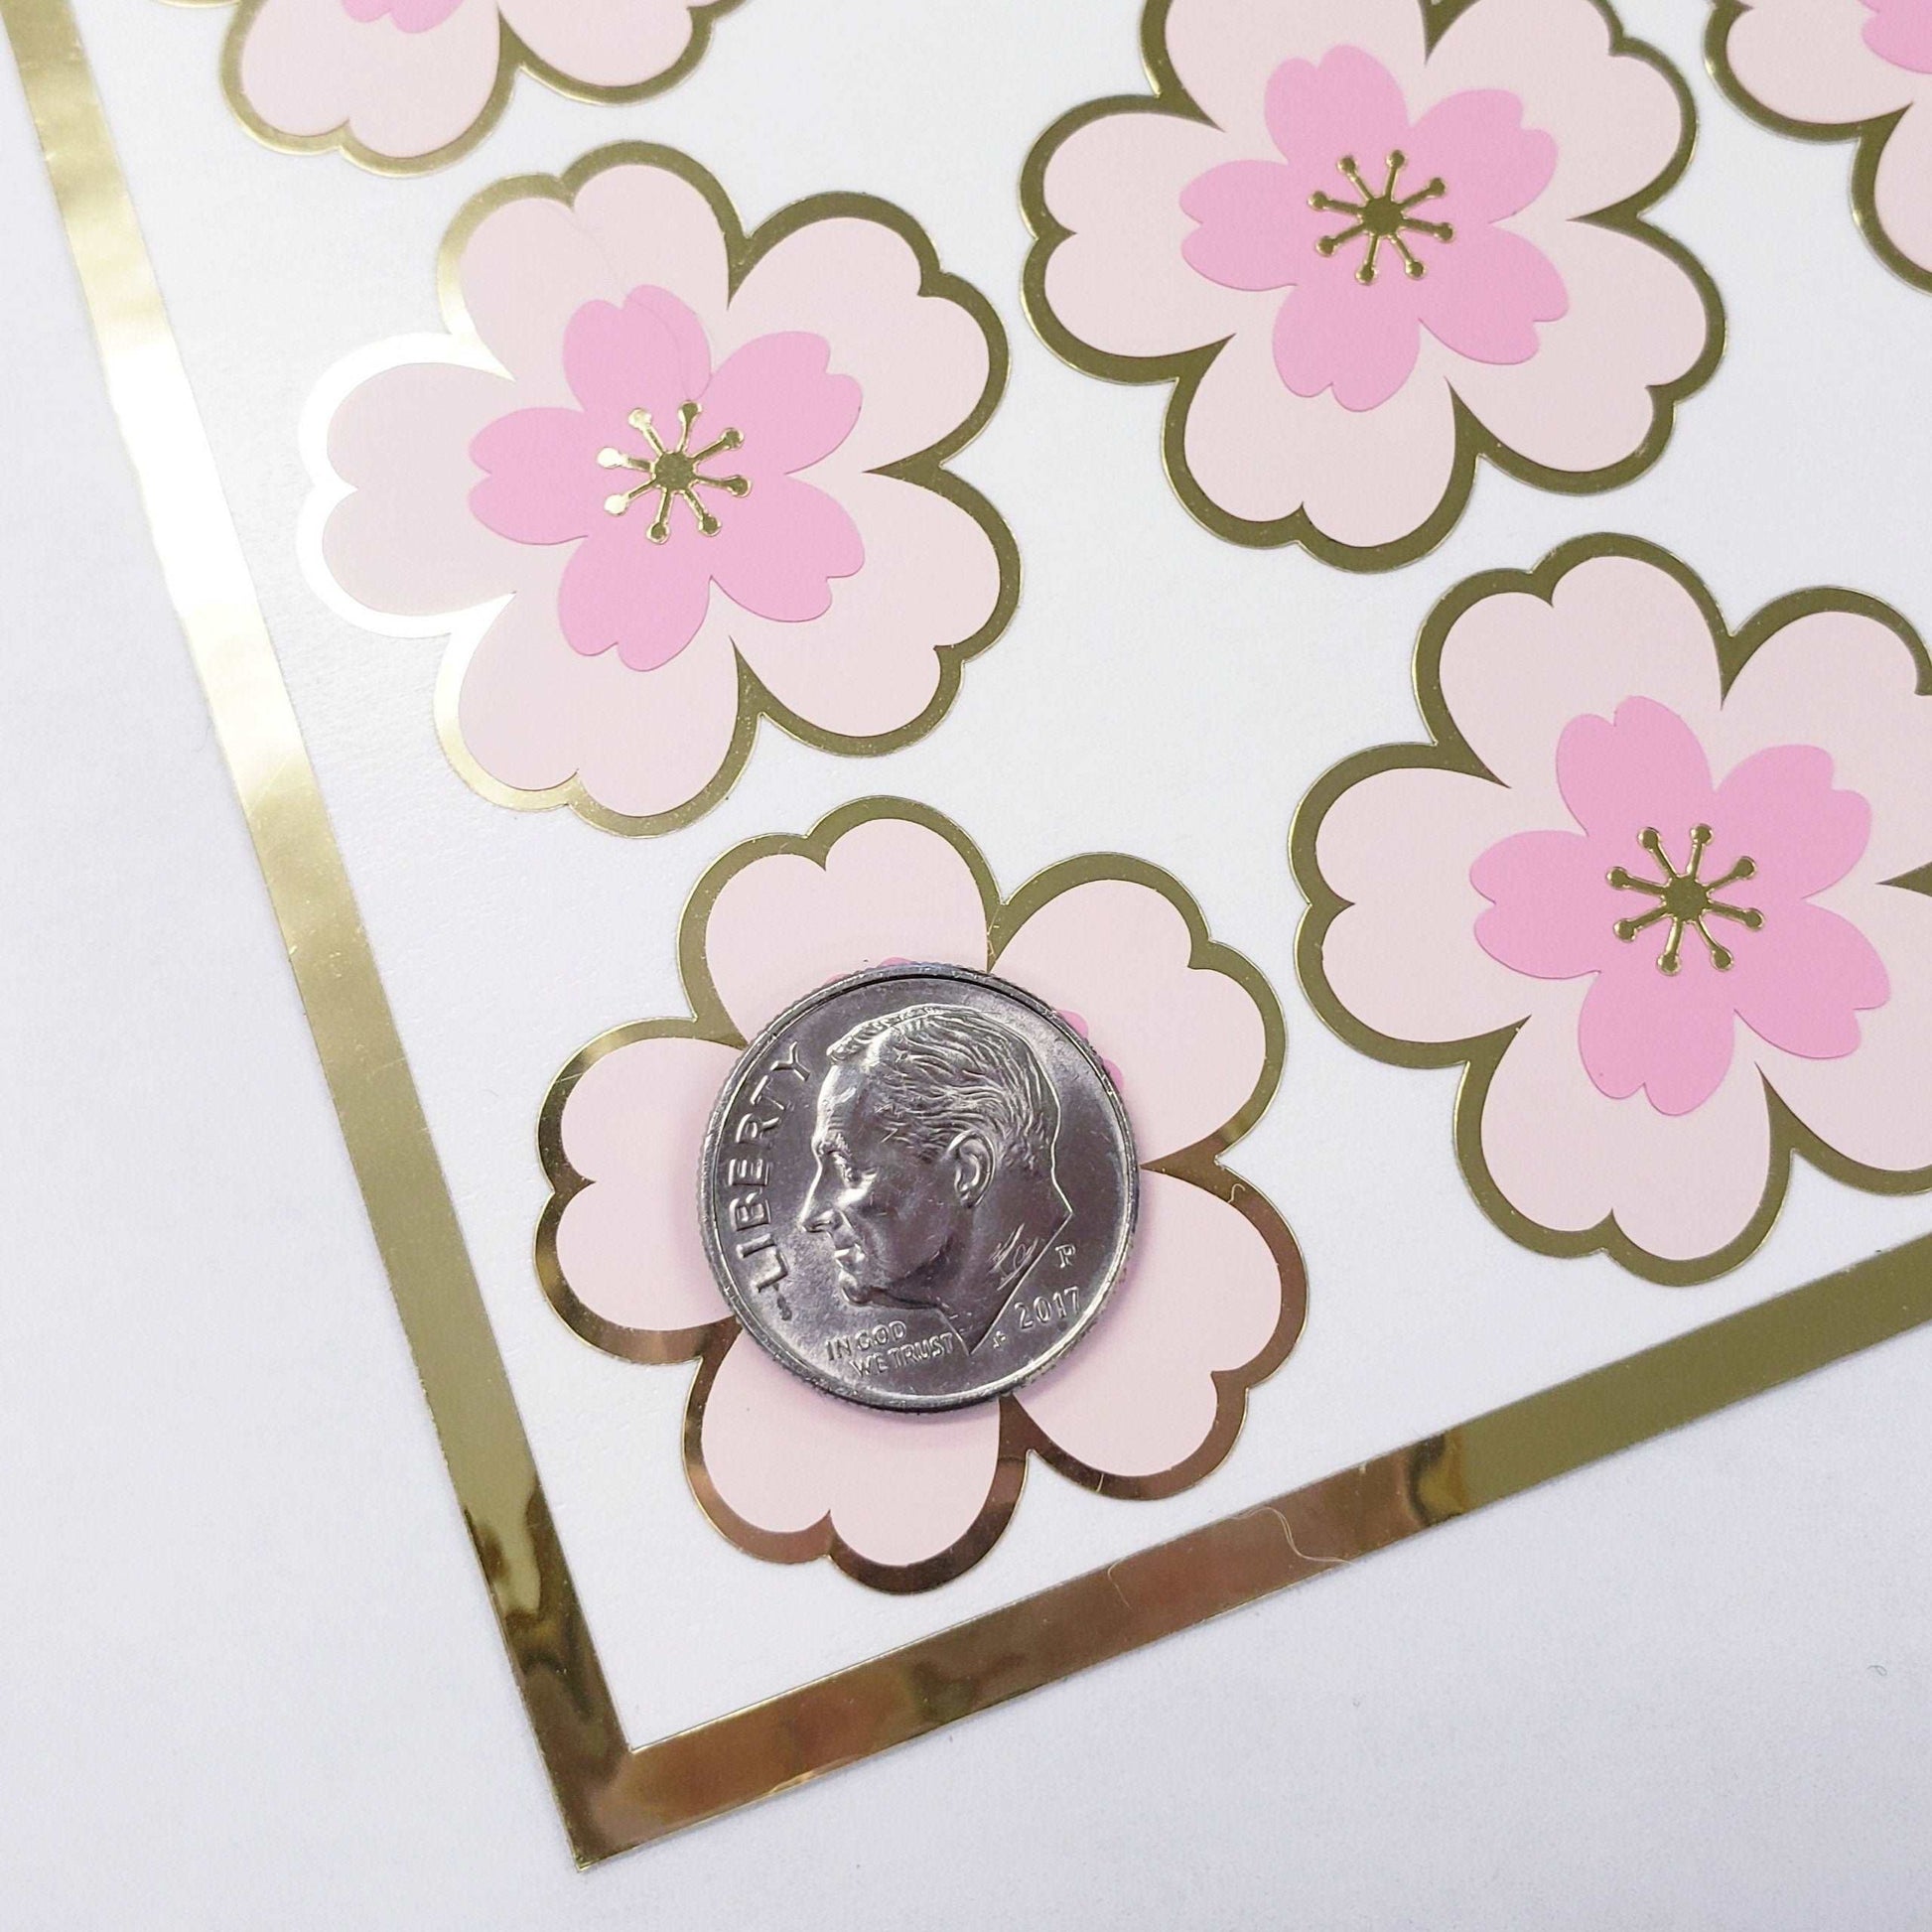 Set of 20 Pink and Gold Cherry Blossom Stickers, Sakura Flower Decals, Spring Crafts, Wedding Envelope Seals, Mother's Day Gift, waterproof.